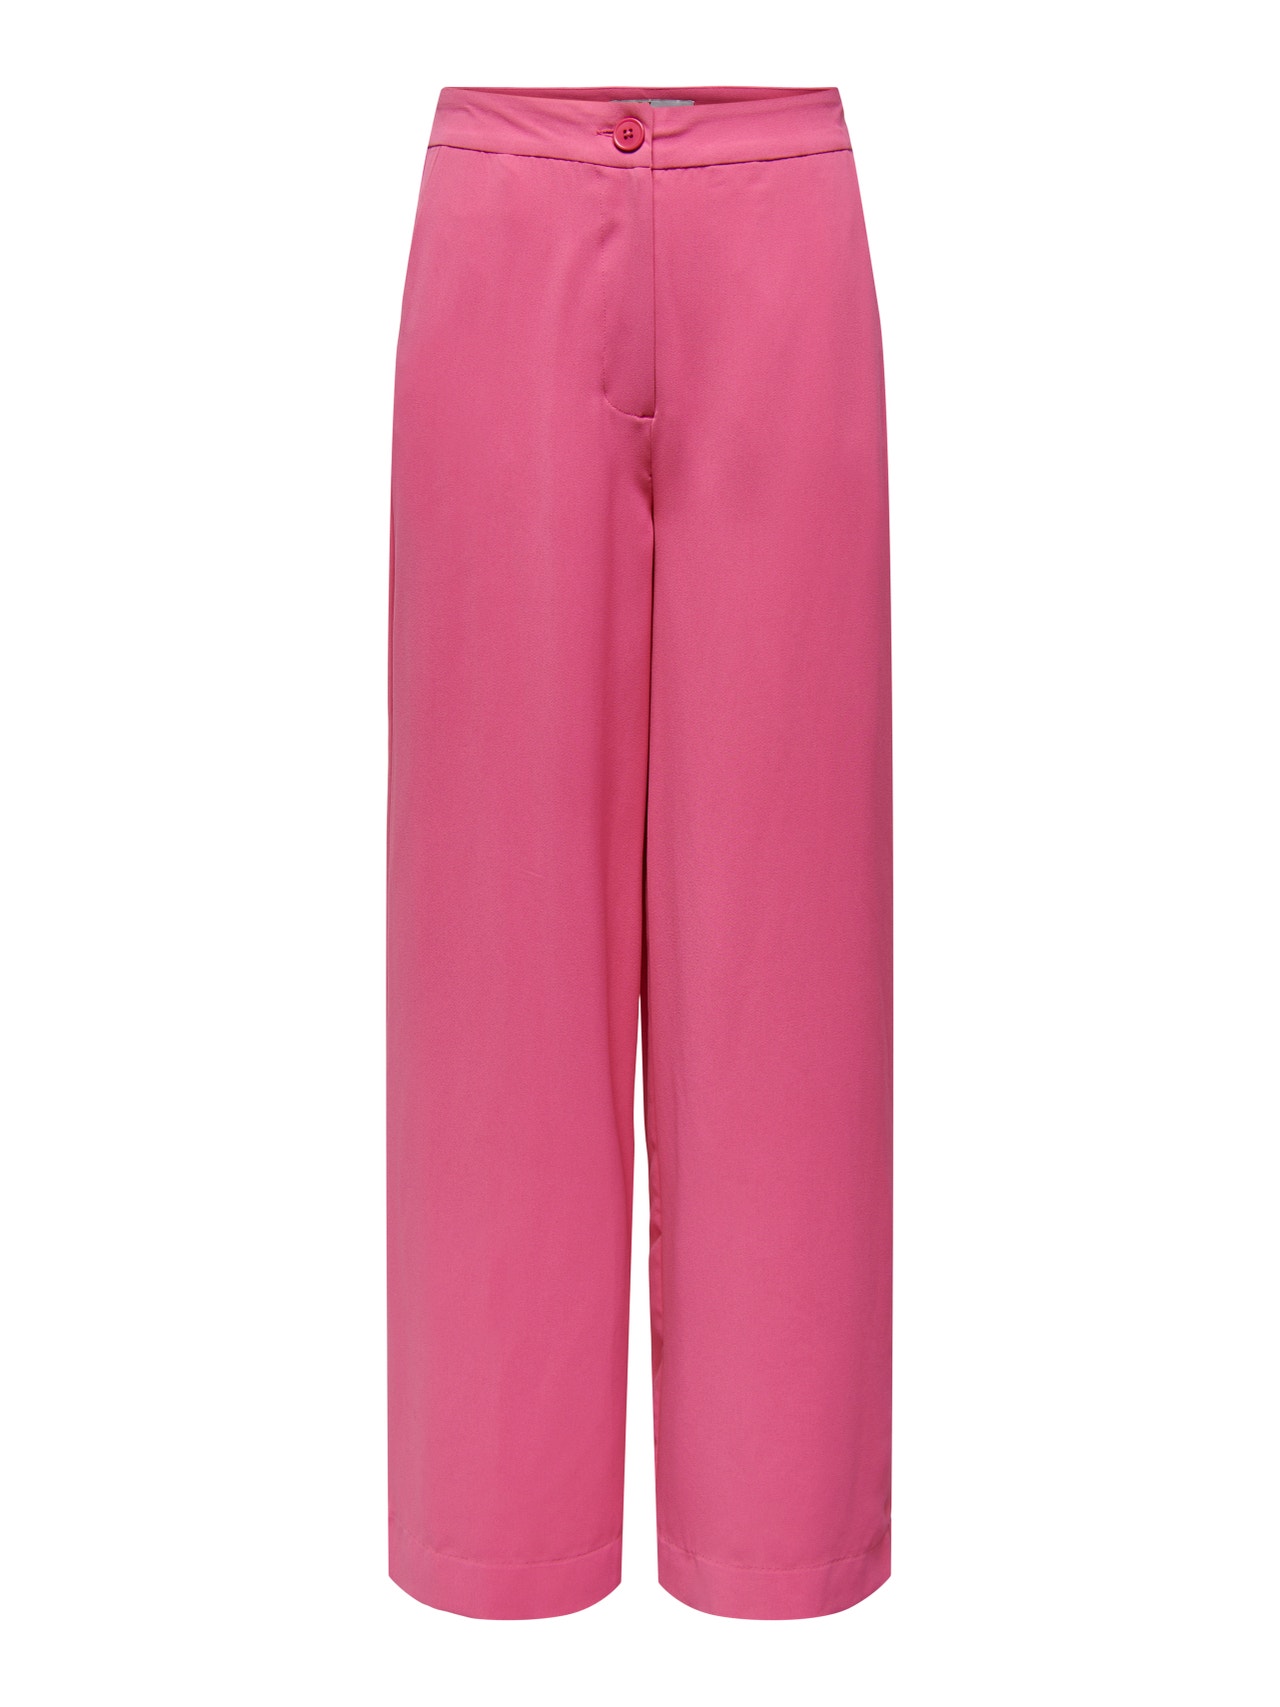 ONLY Normal geschnitten Hohe Taille Hose -Shocking Pink - 15279301